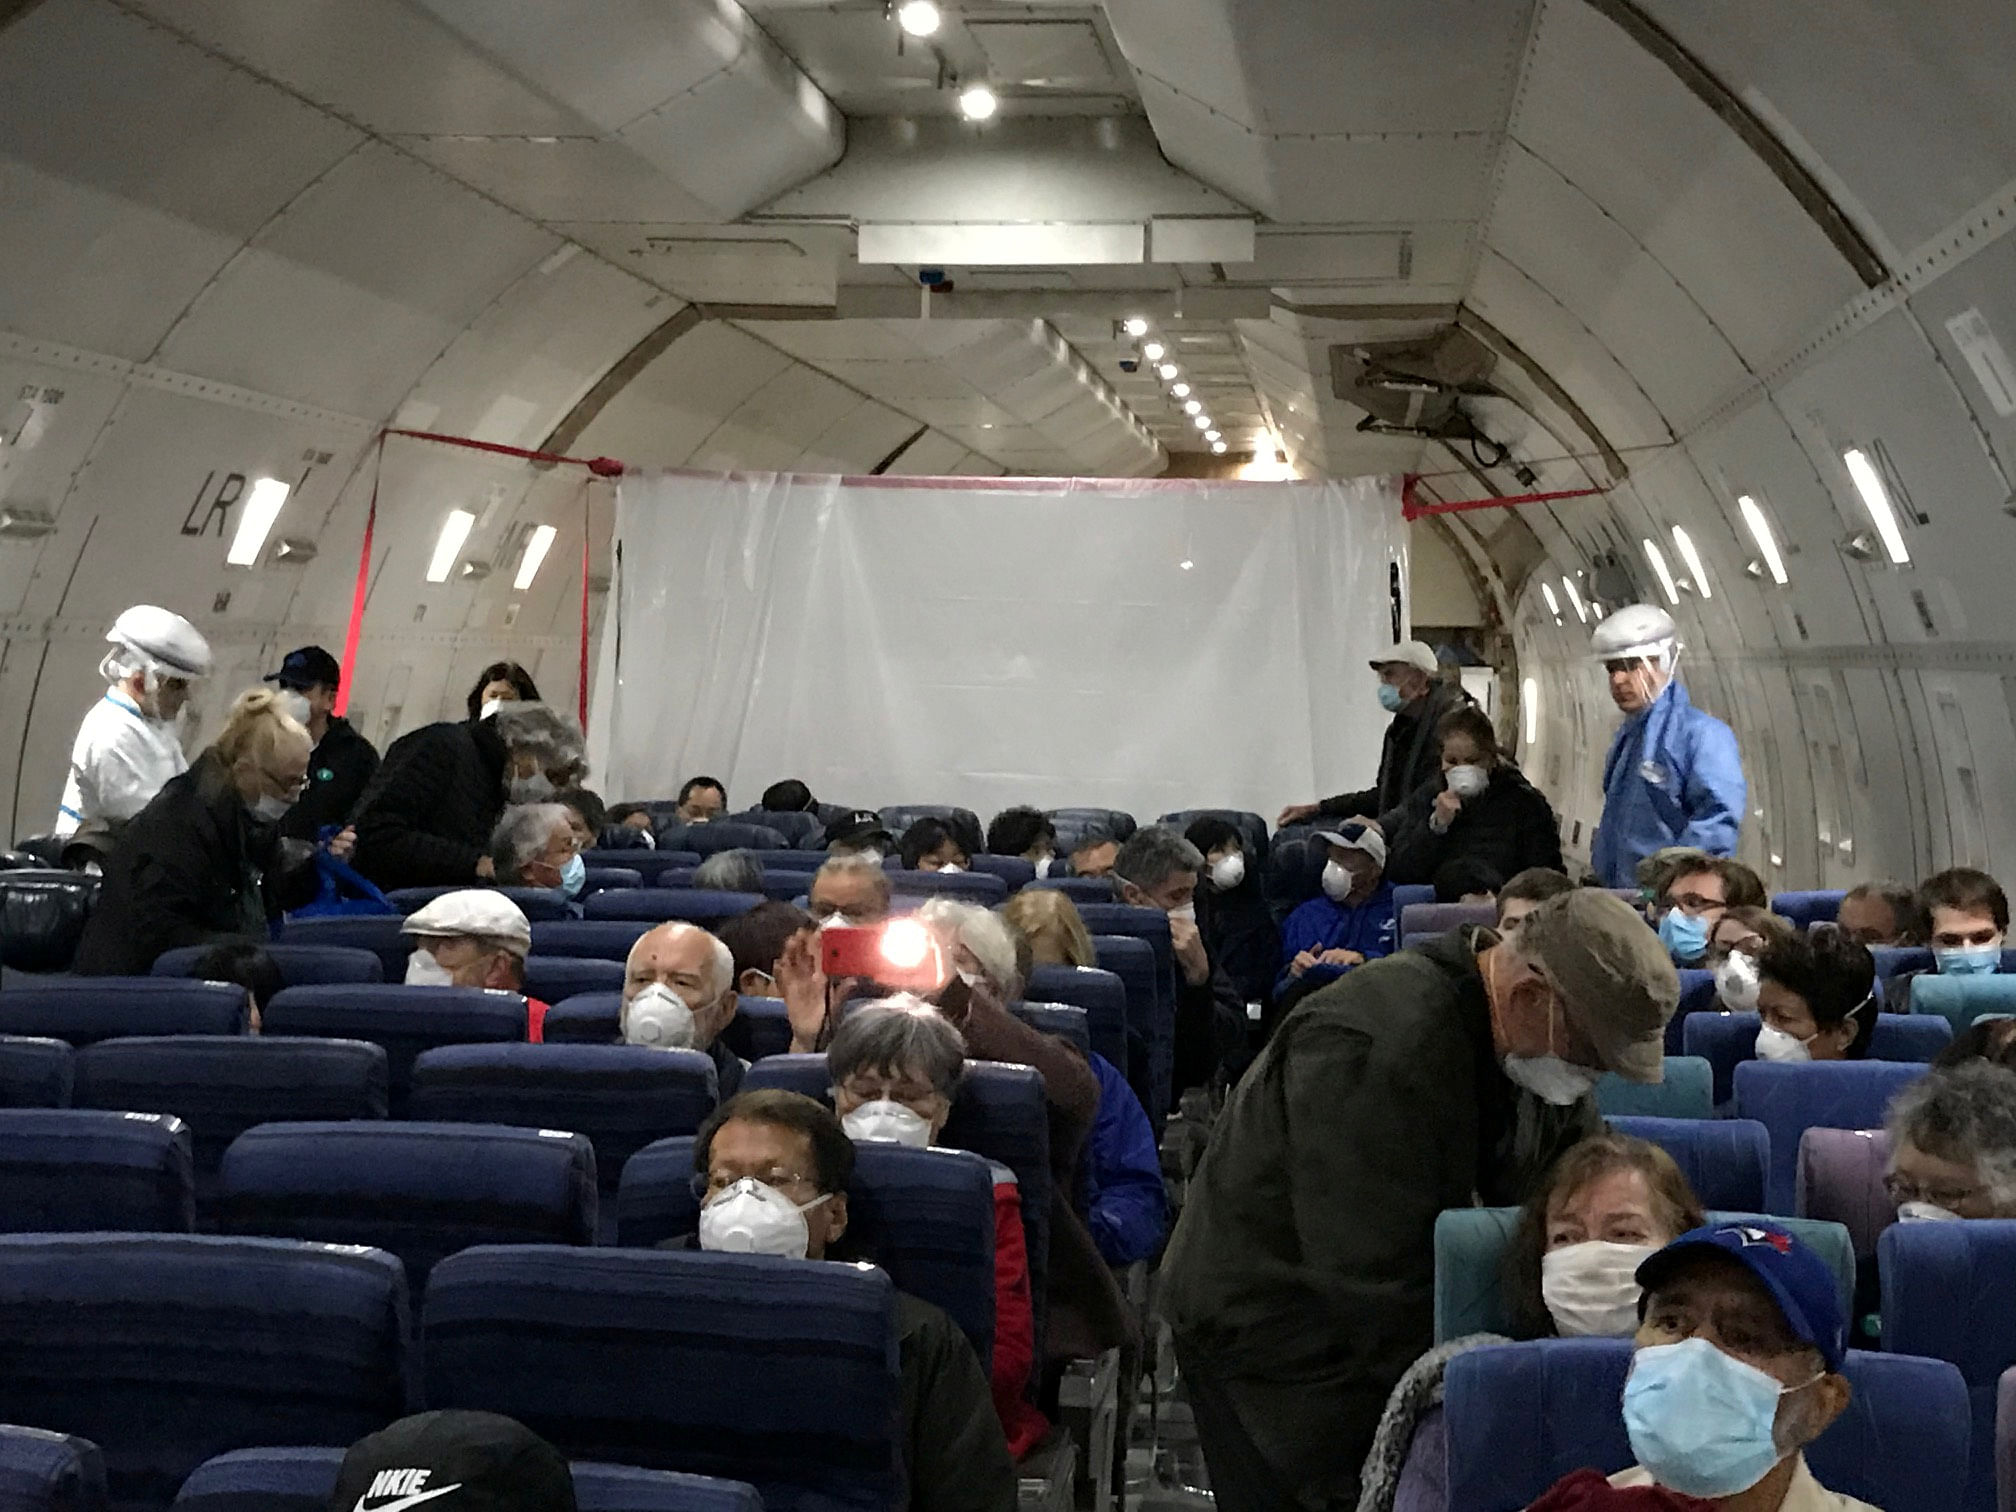 "During the flights, these individuals will continue to be isolated from the other passengers." (Credit: Reuters Photo)